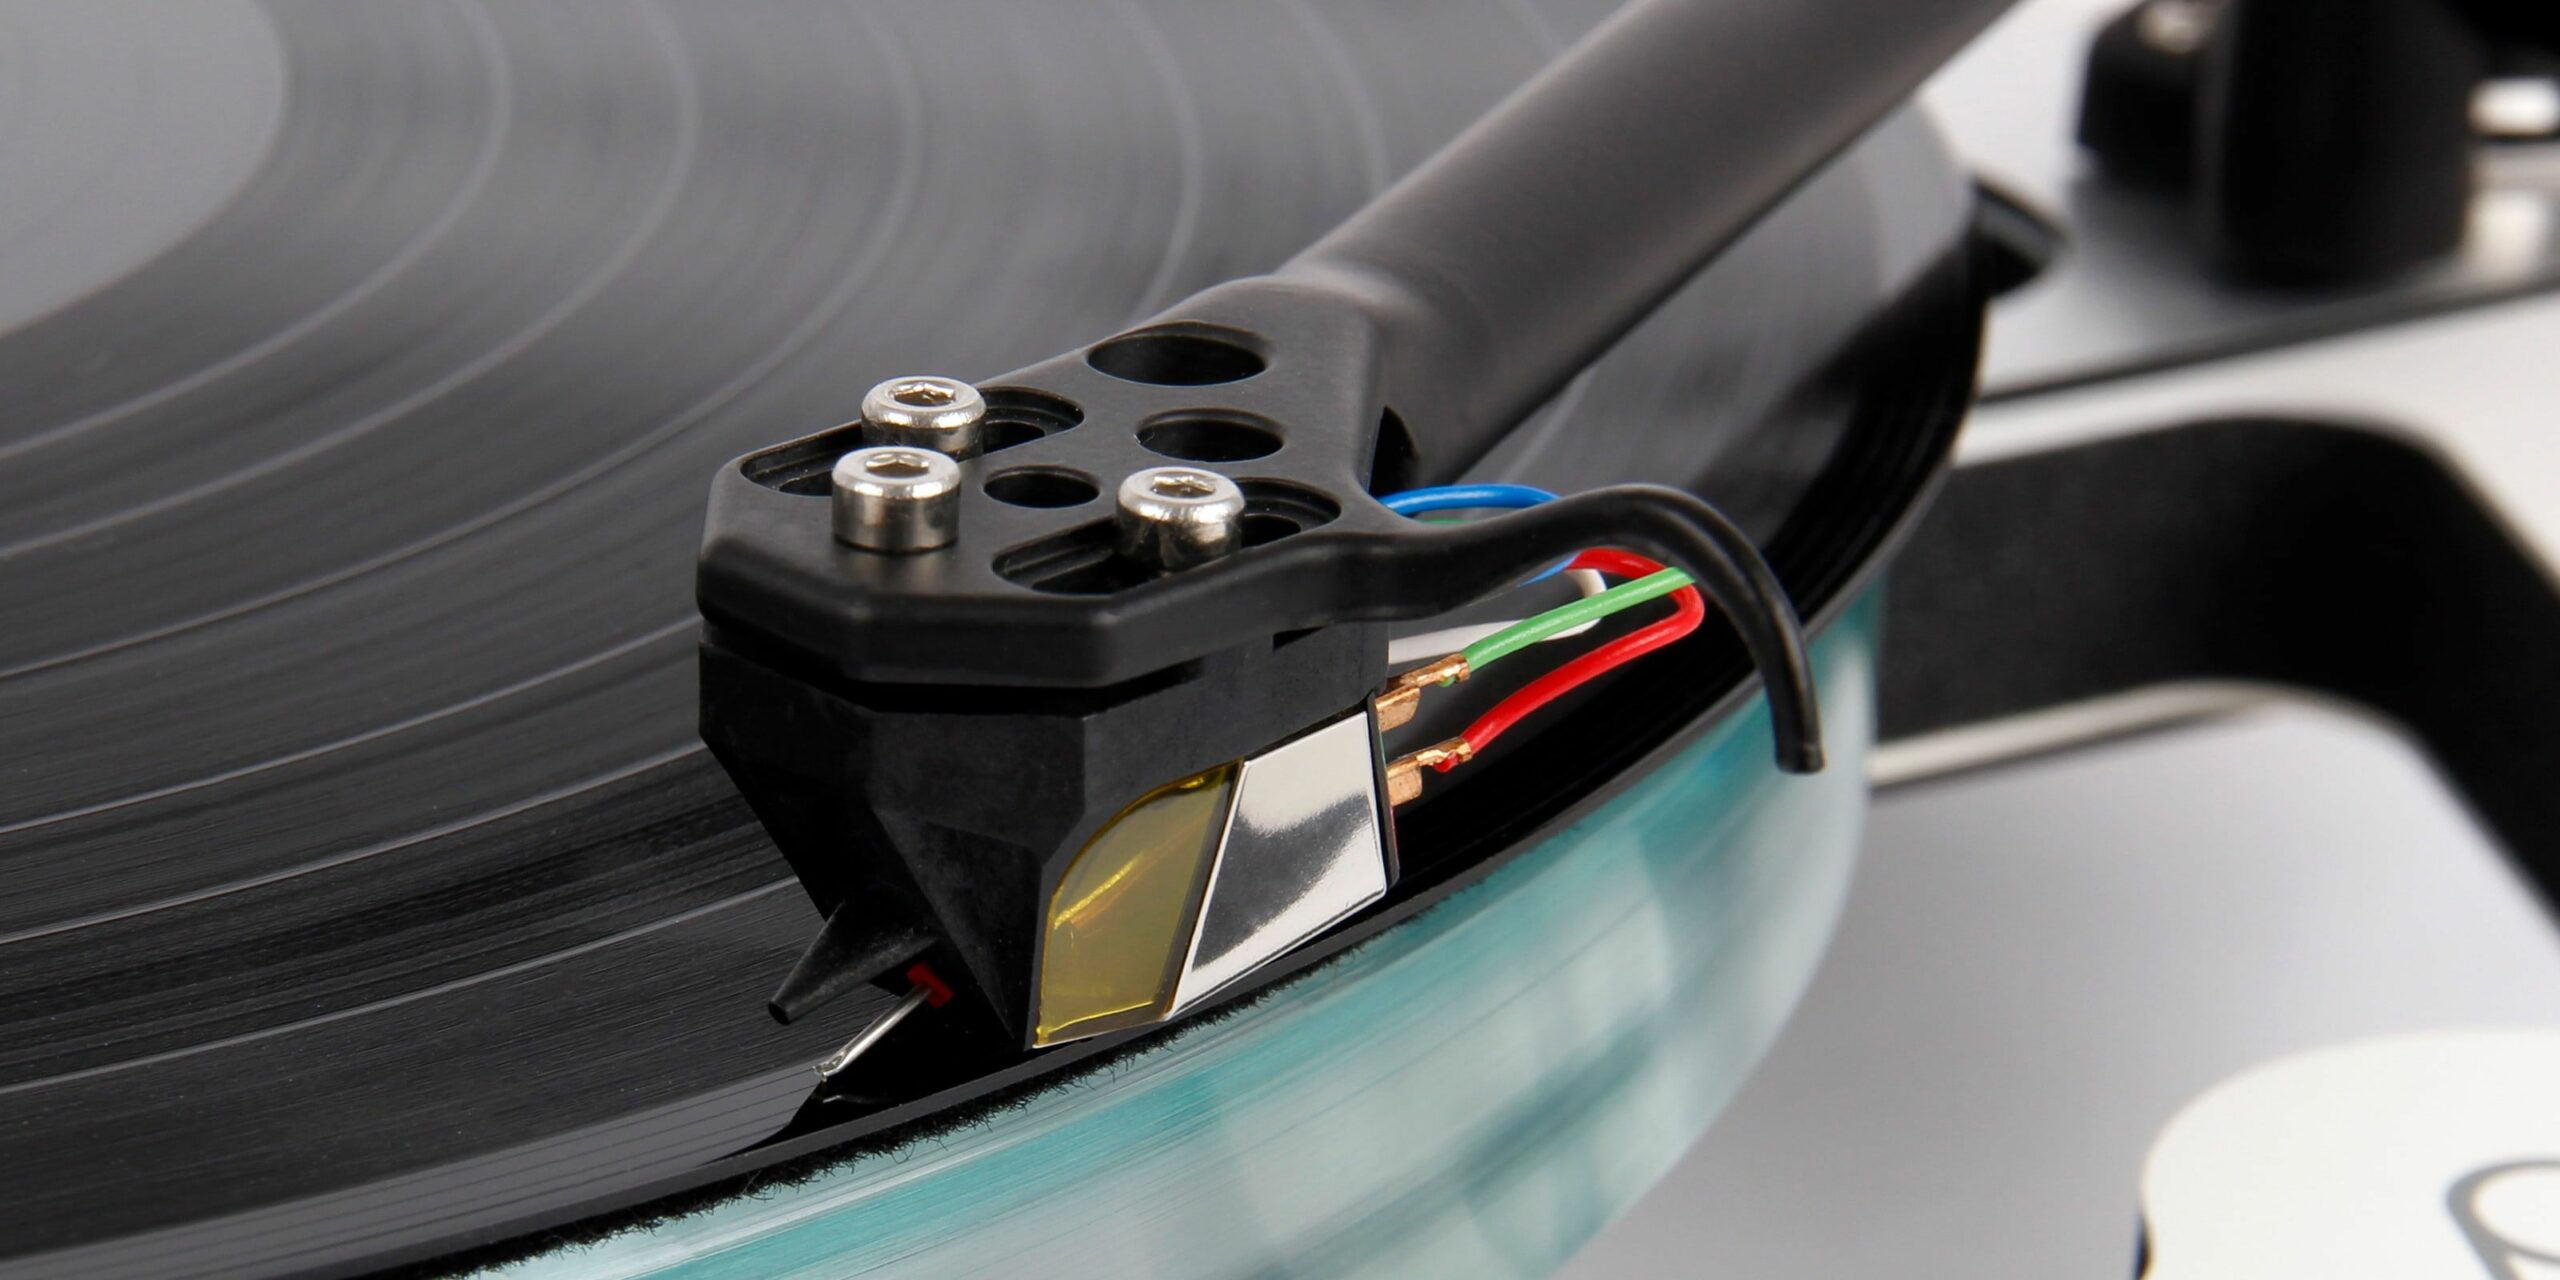 Featured image for “Rega Introduces New Nd7 Moving Magnet Cartridge”